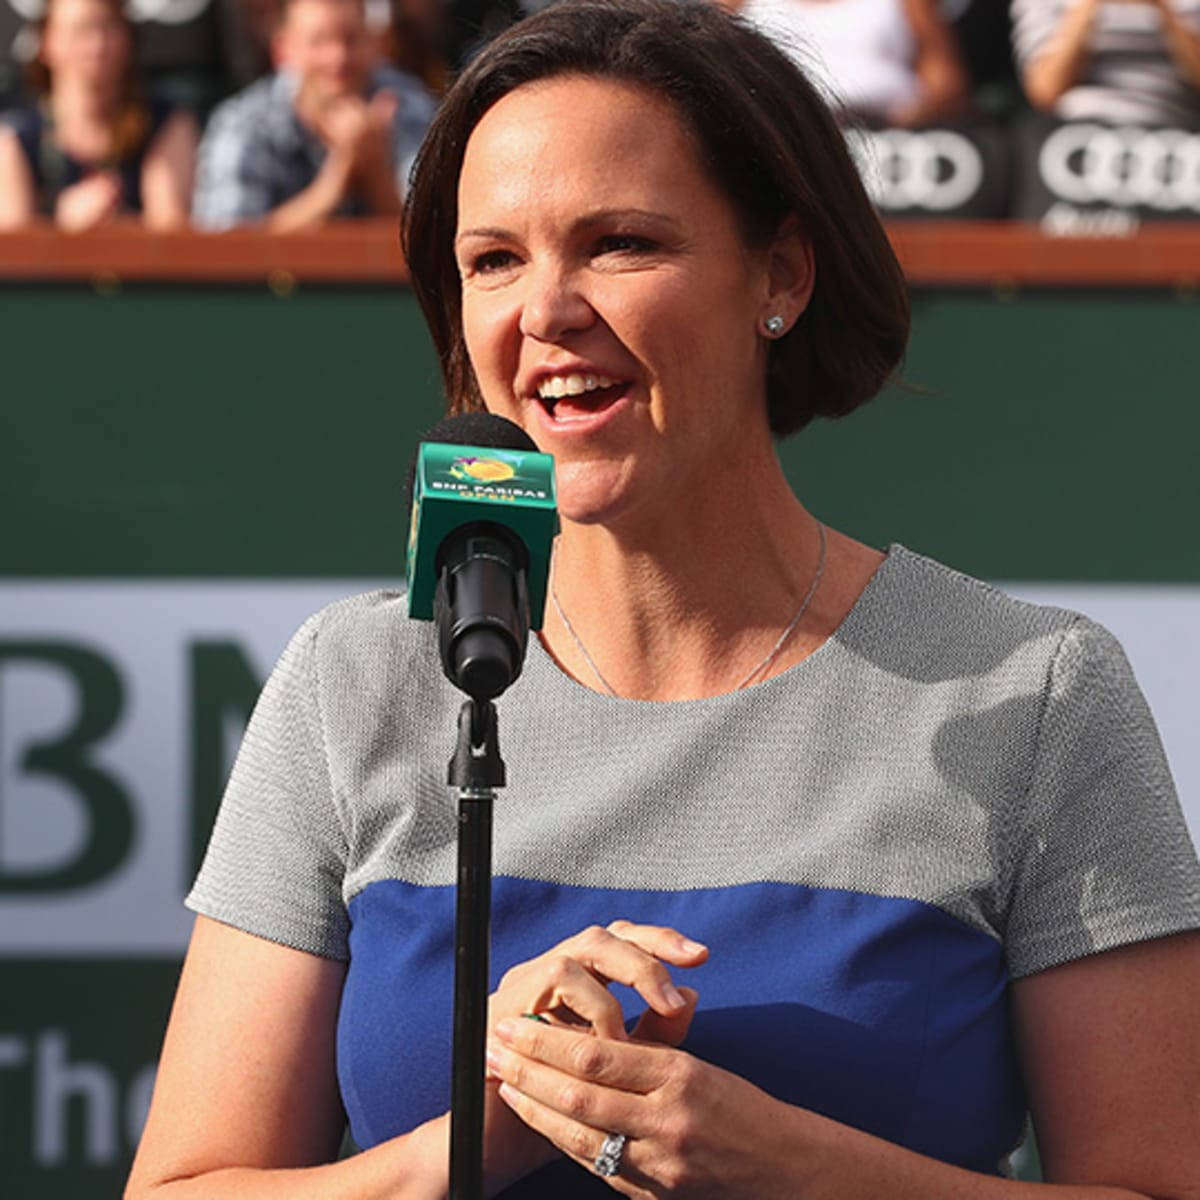 Lindsay Davenport Speaking On A Microphone Wallpaper